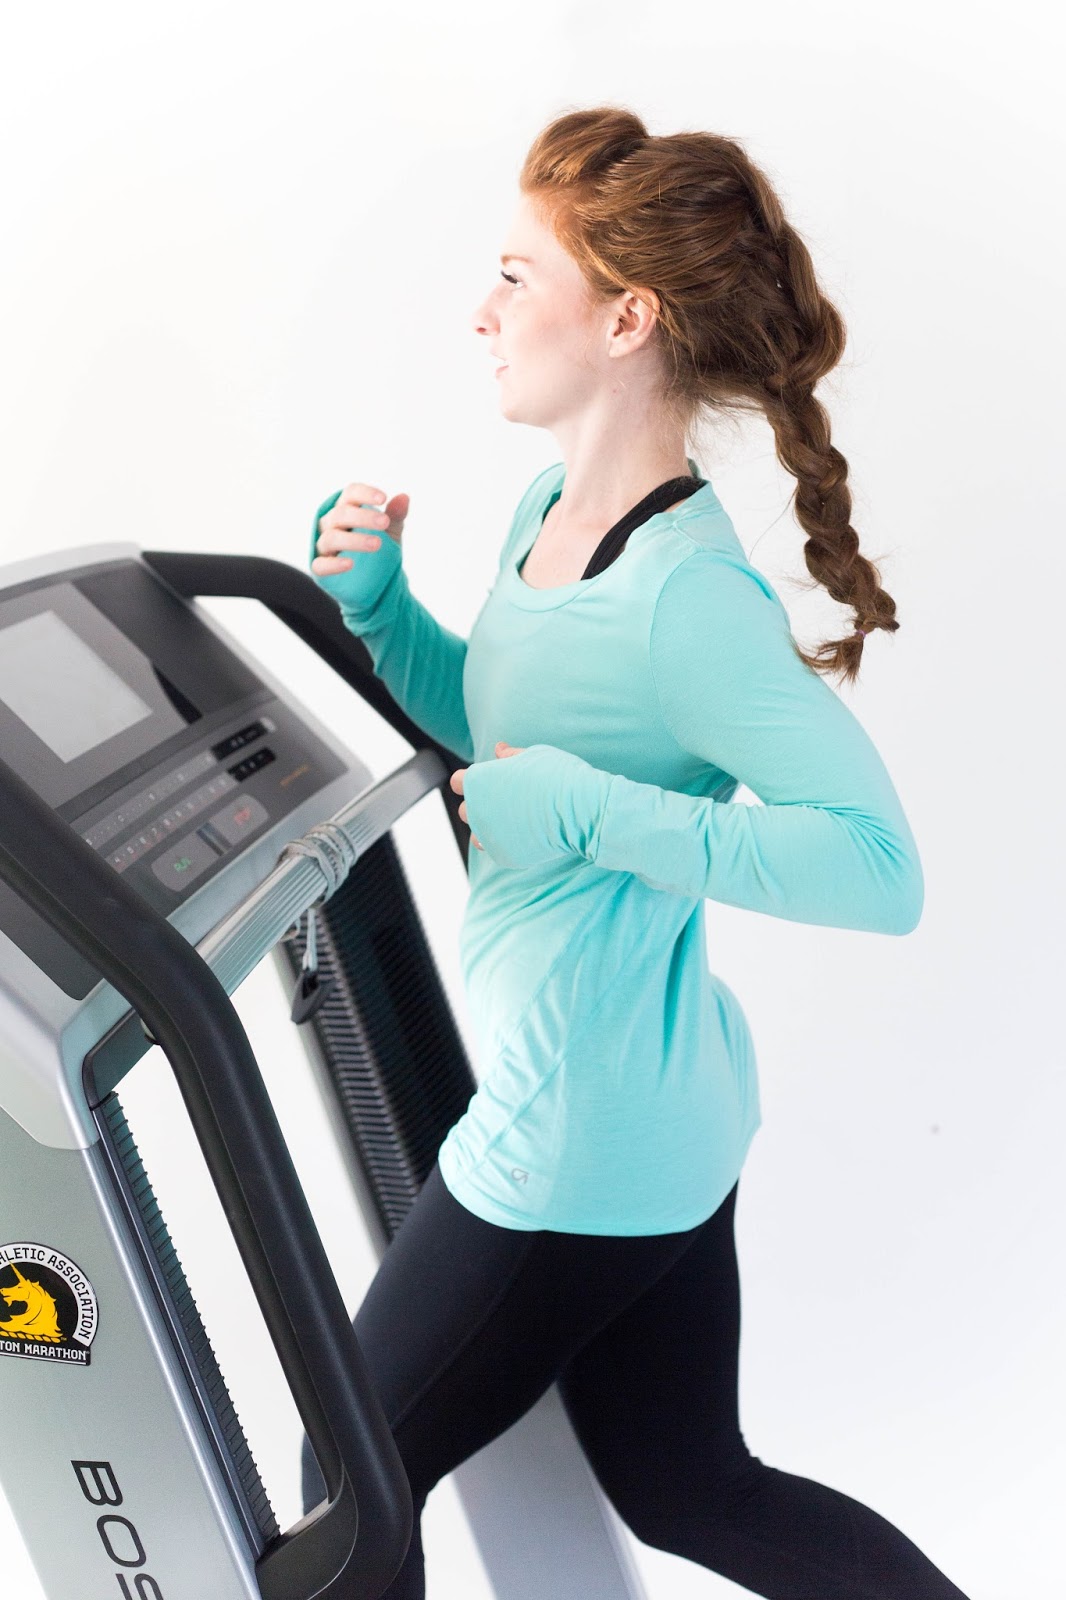 do it yourself divas: Free 30 min. Treadmill Workout and a Taste of ...